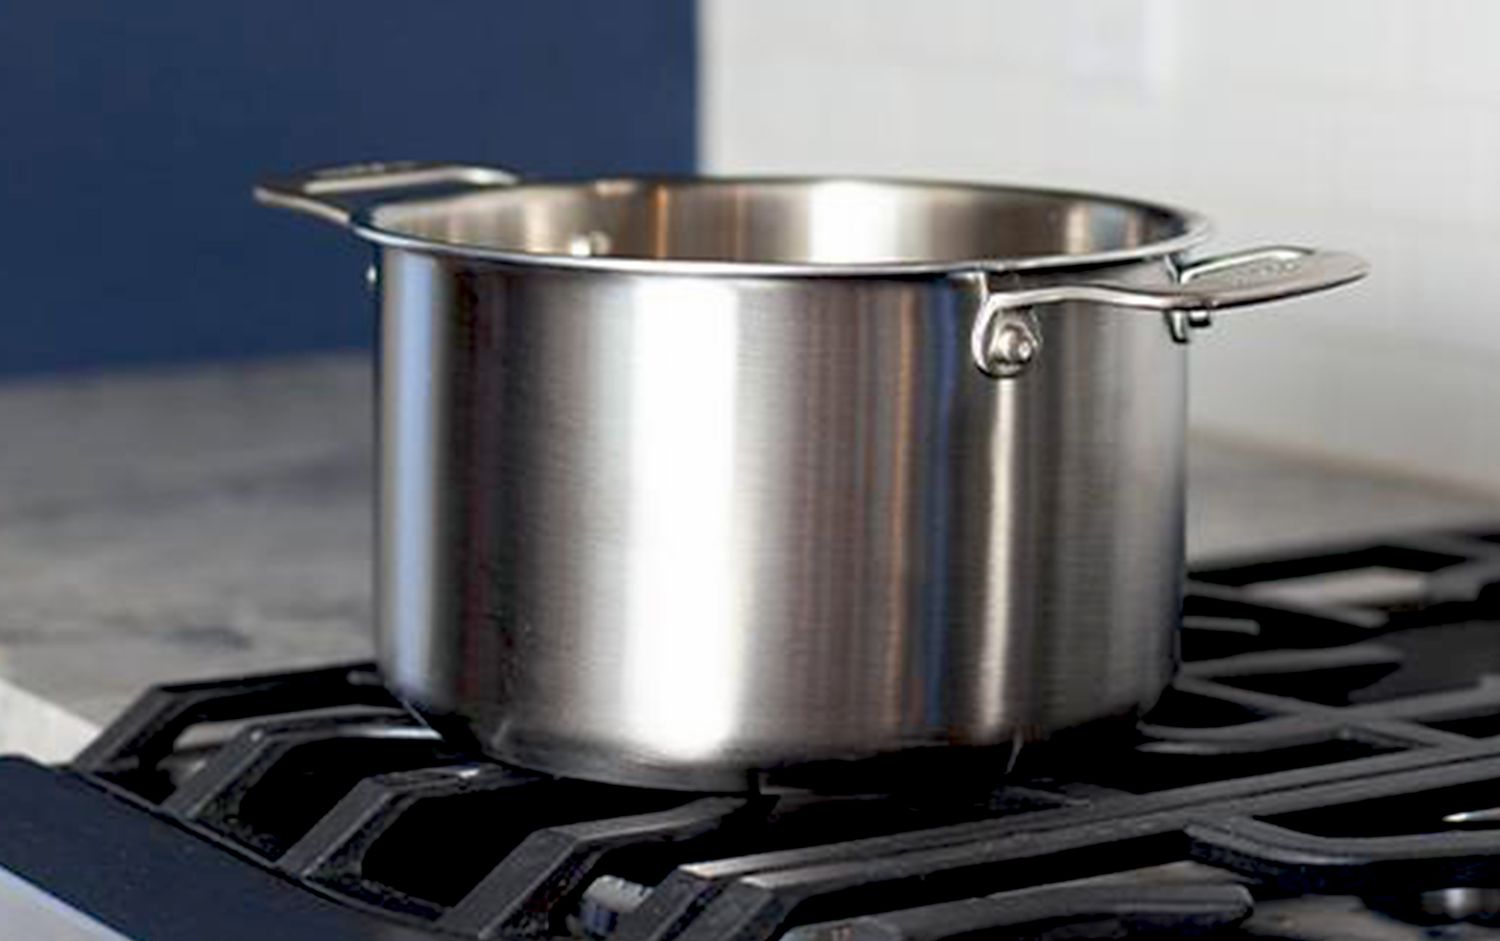 Stainless stockpot on a stove in a kitchen